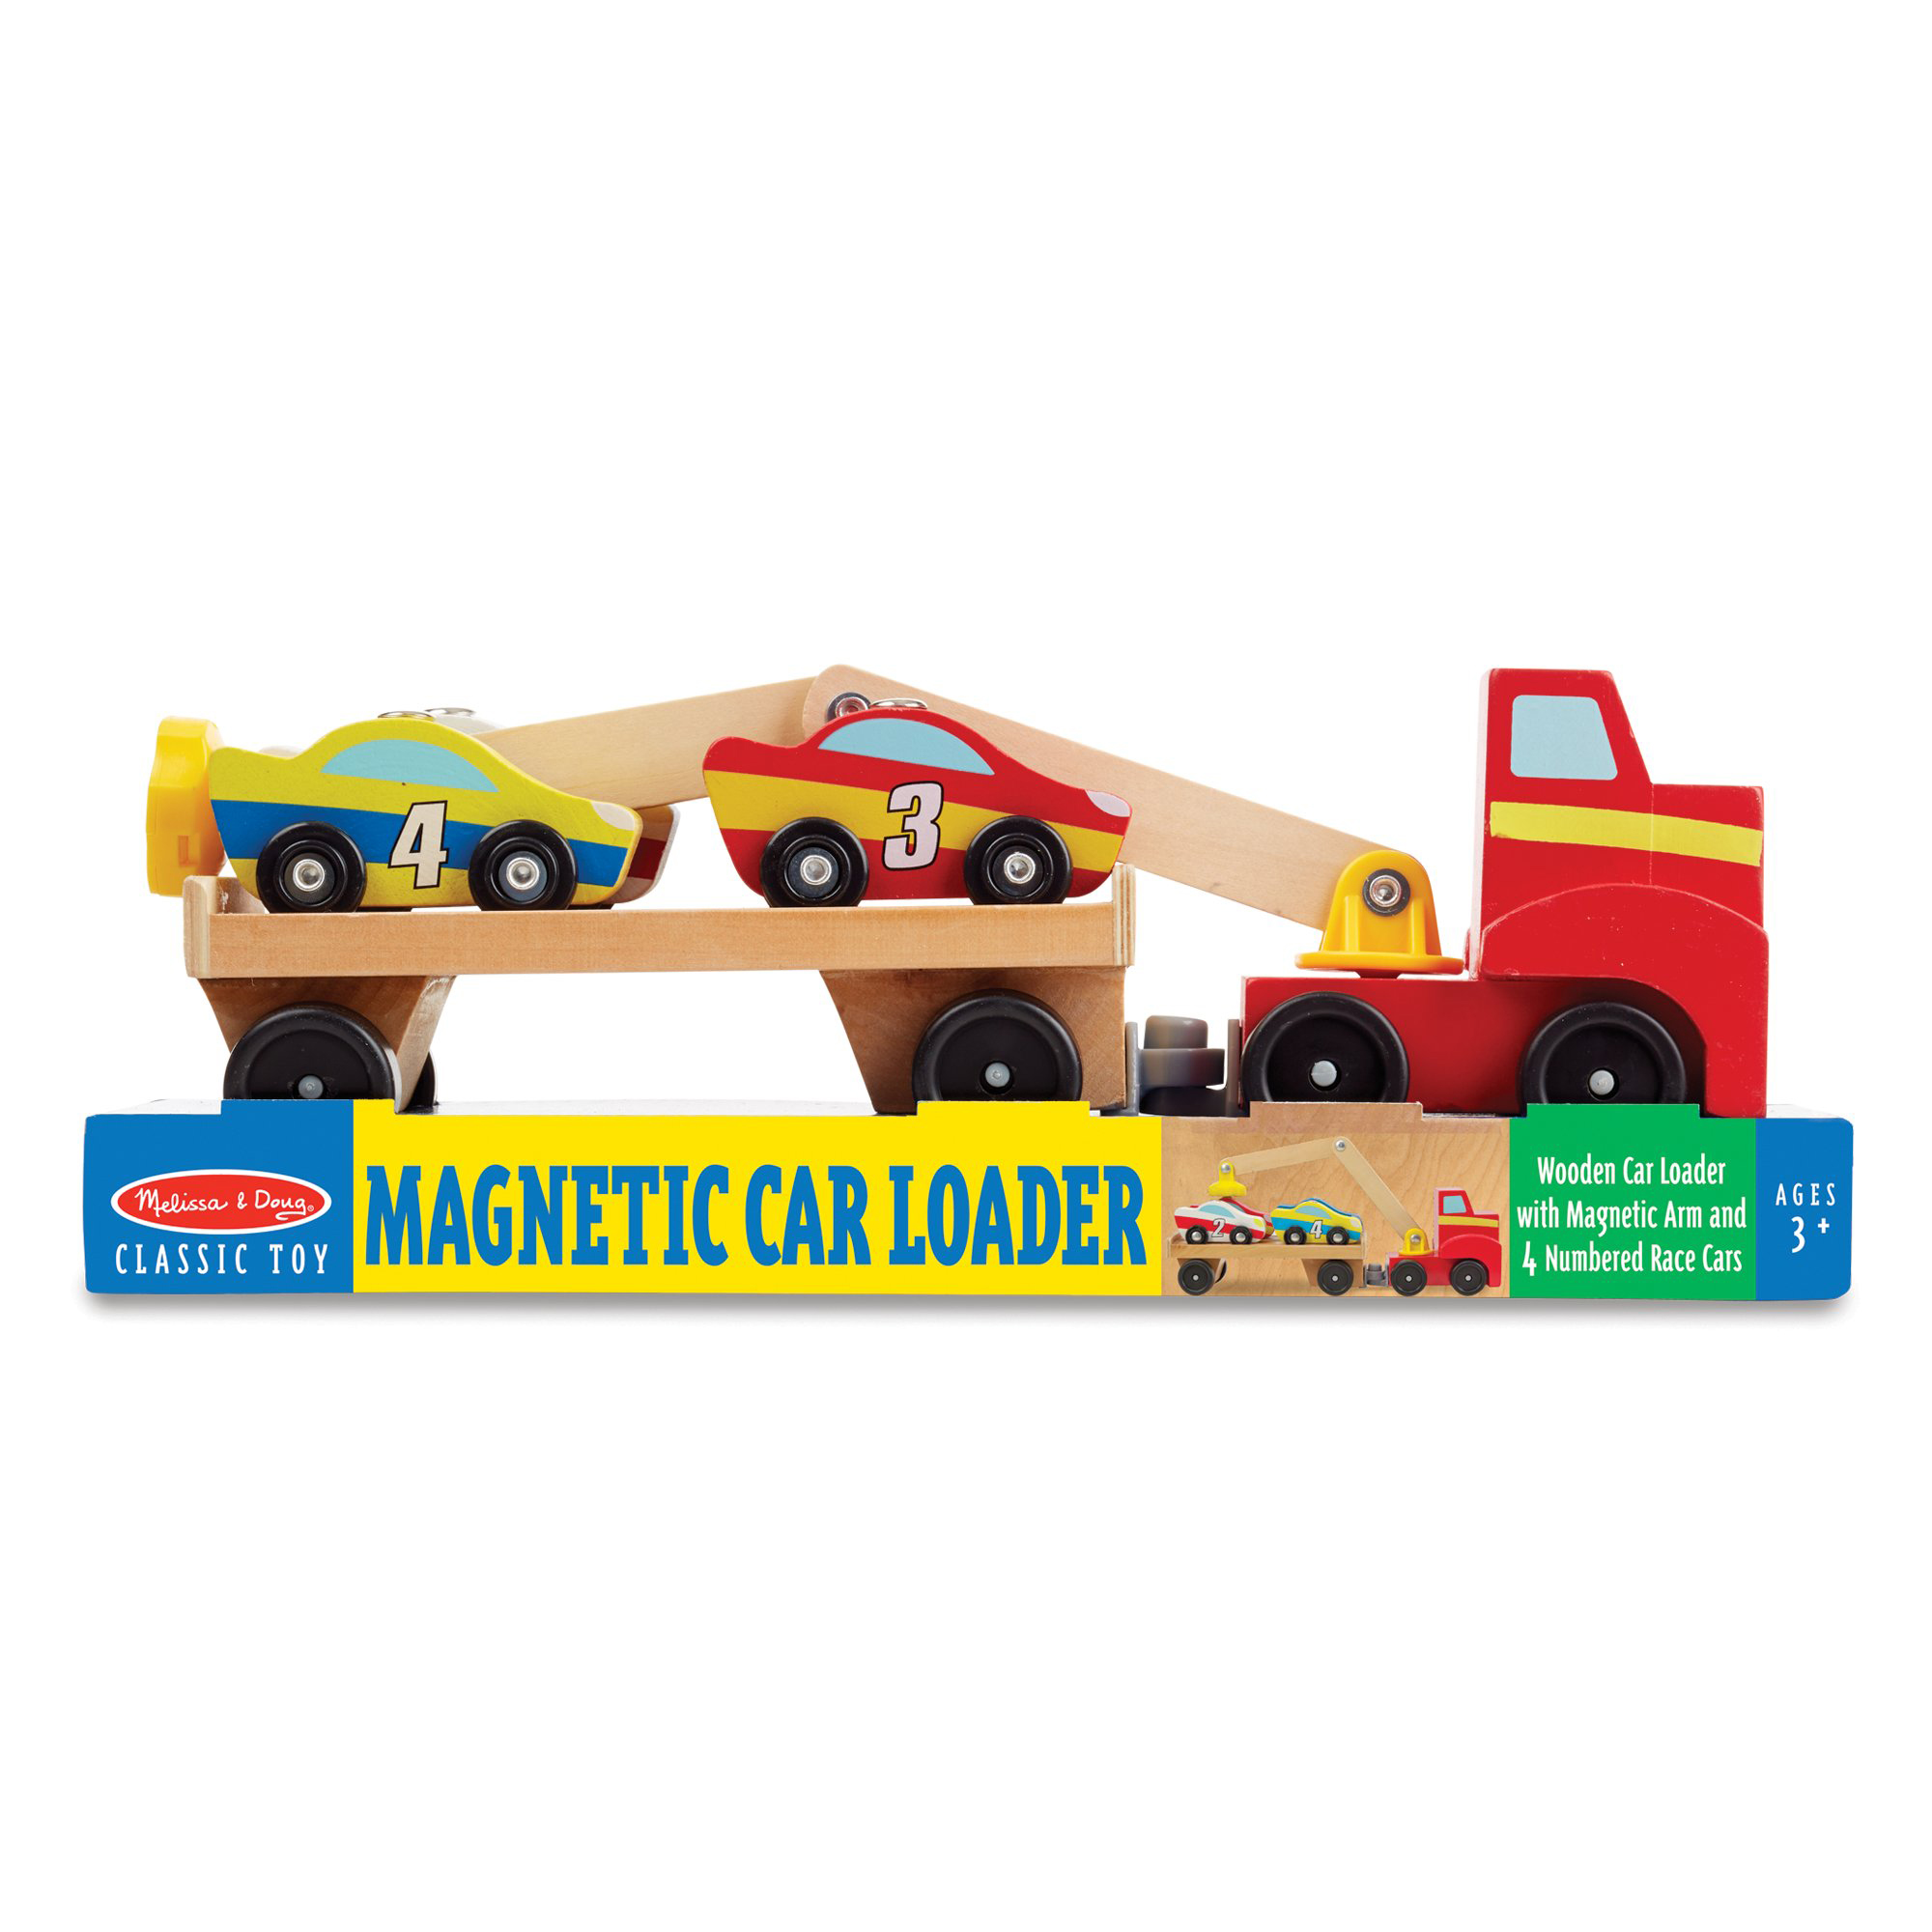 Magnetic Car Loader Wooden Toy Set, Cars & Trucks, Helps Develop Motor Skills, 4 Cars And 1 Semi-trailer Truck, 5.75" H